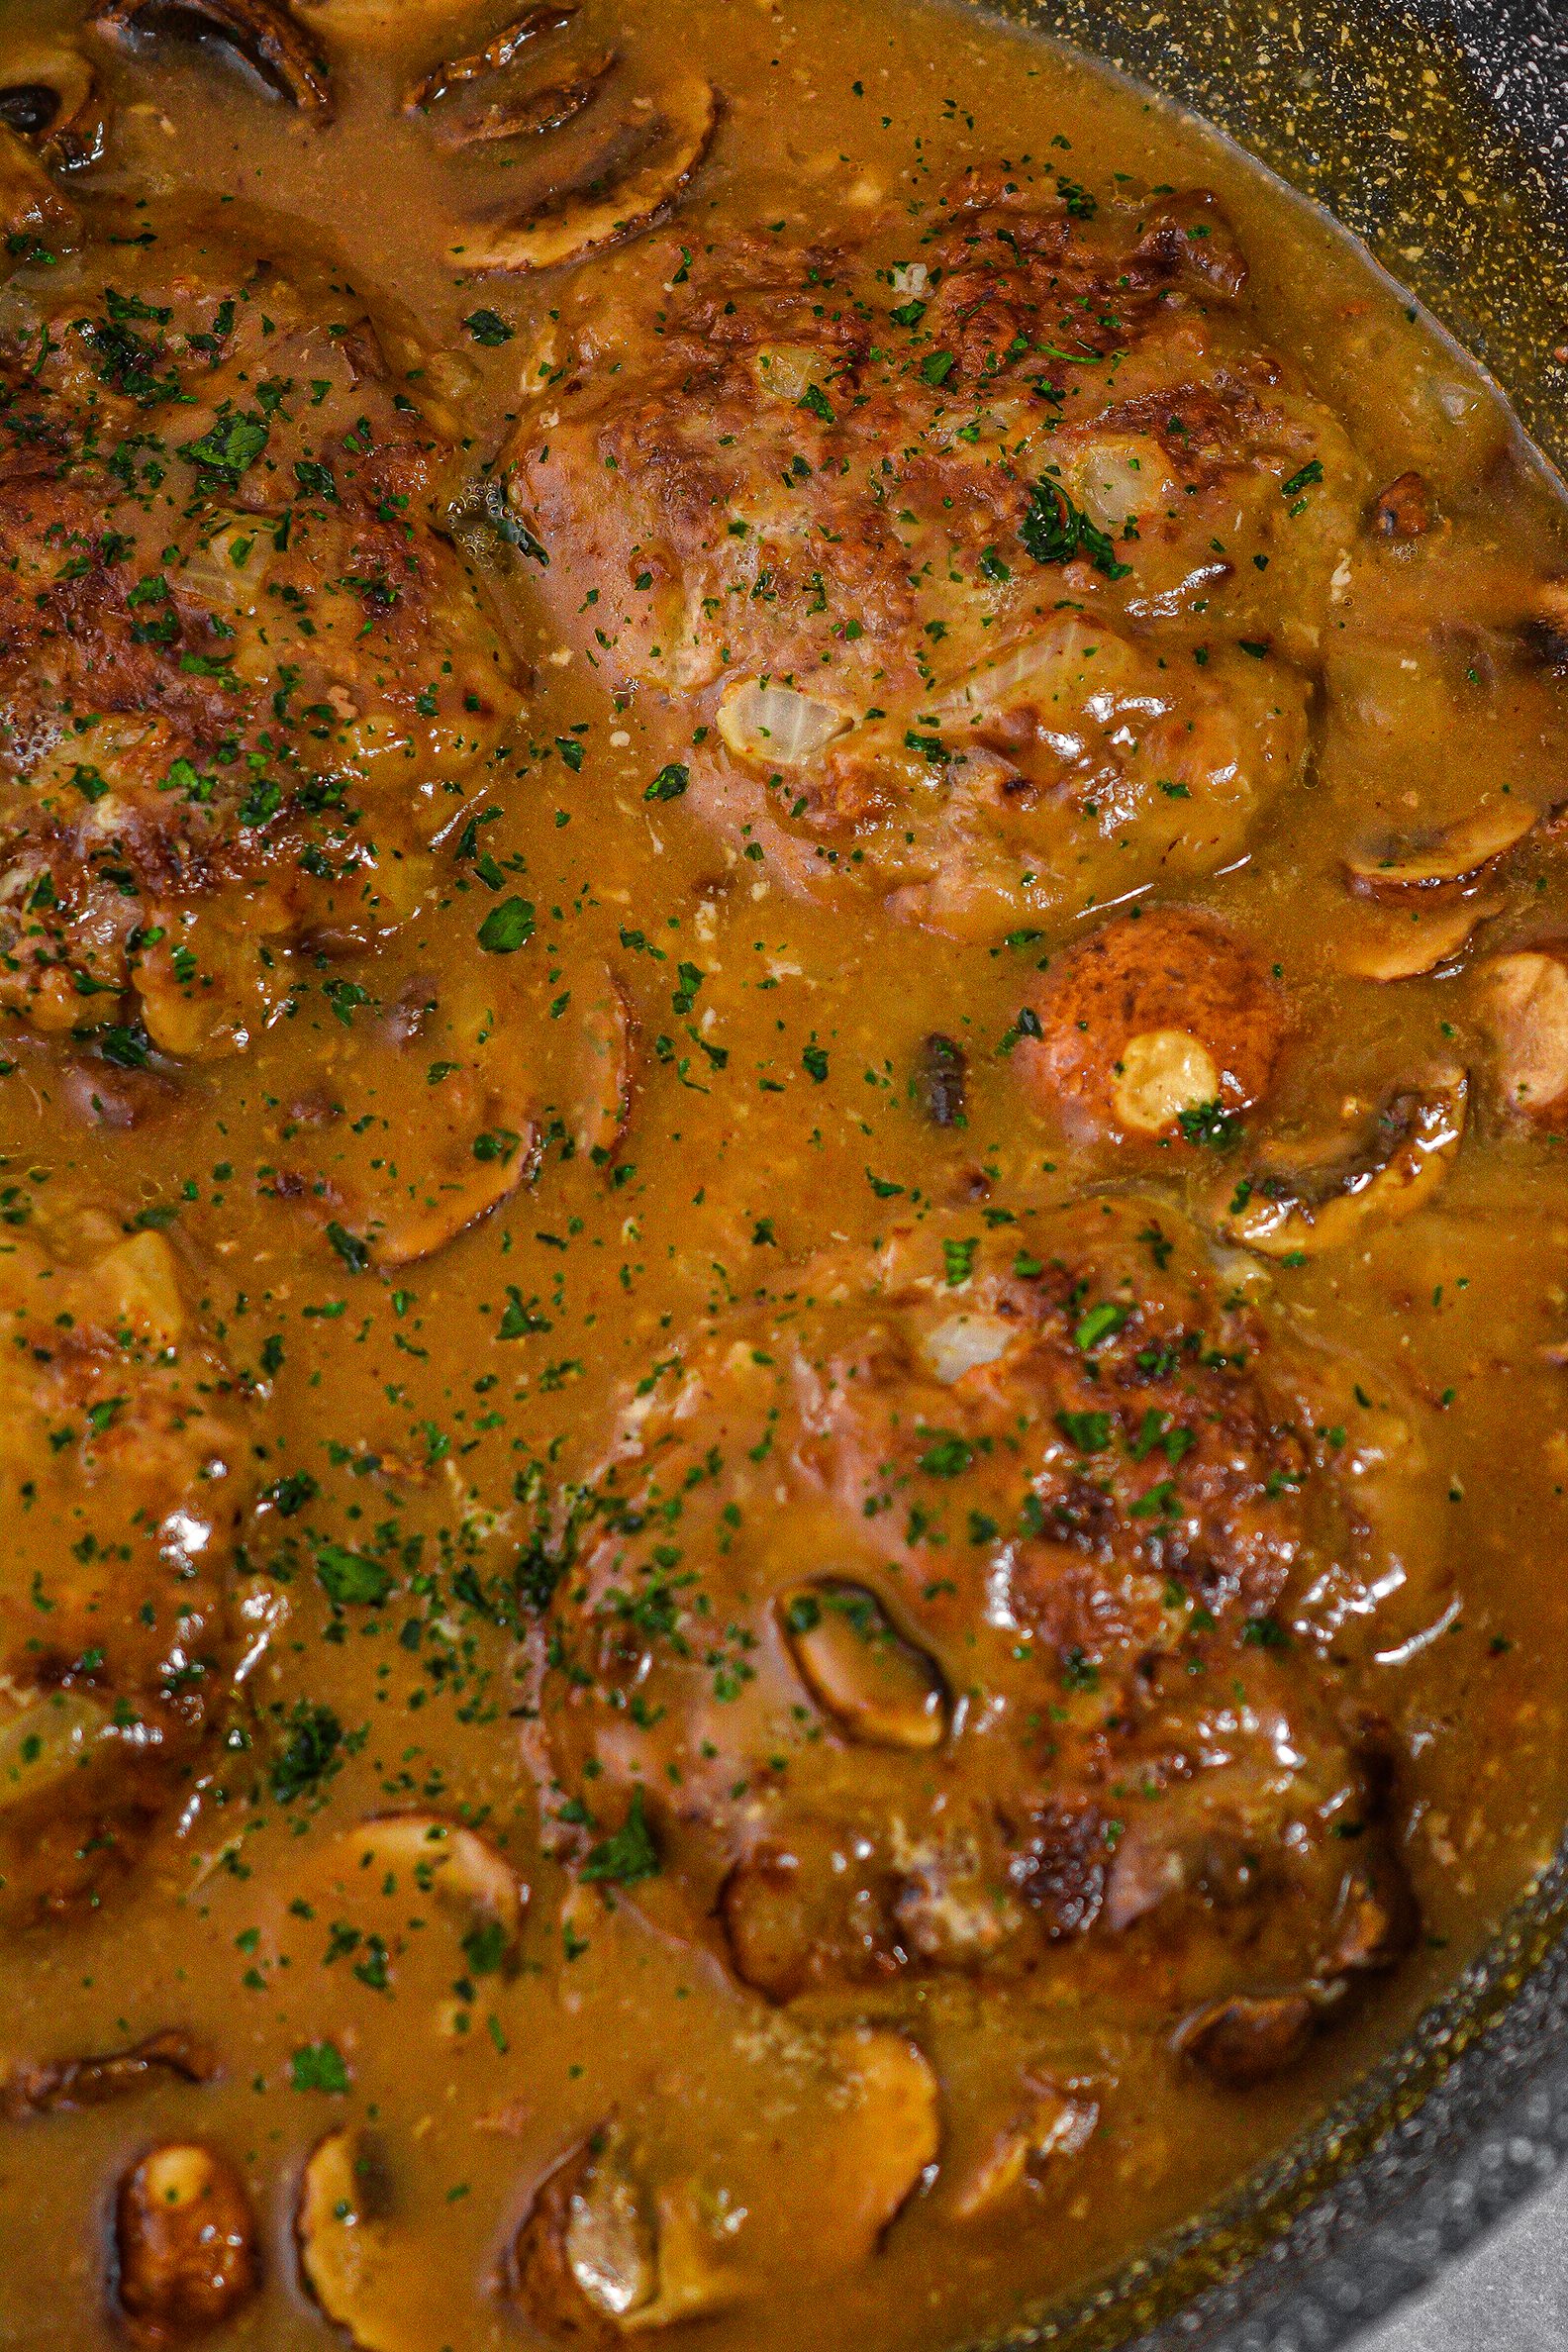 Stir in the mushrooms, and return the patties to the skillet.